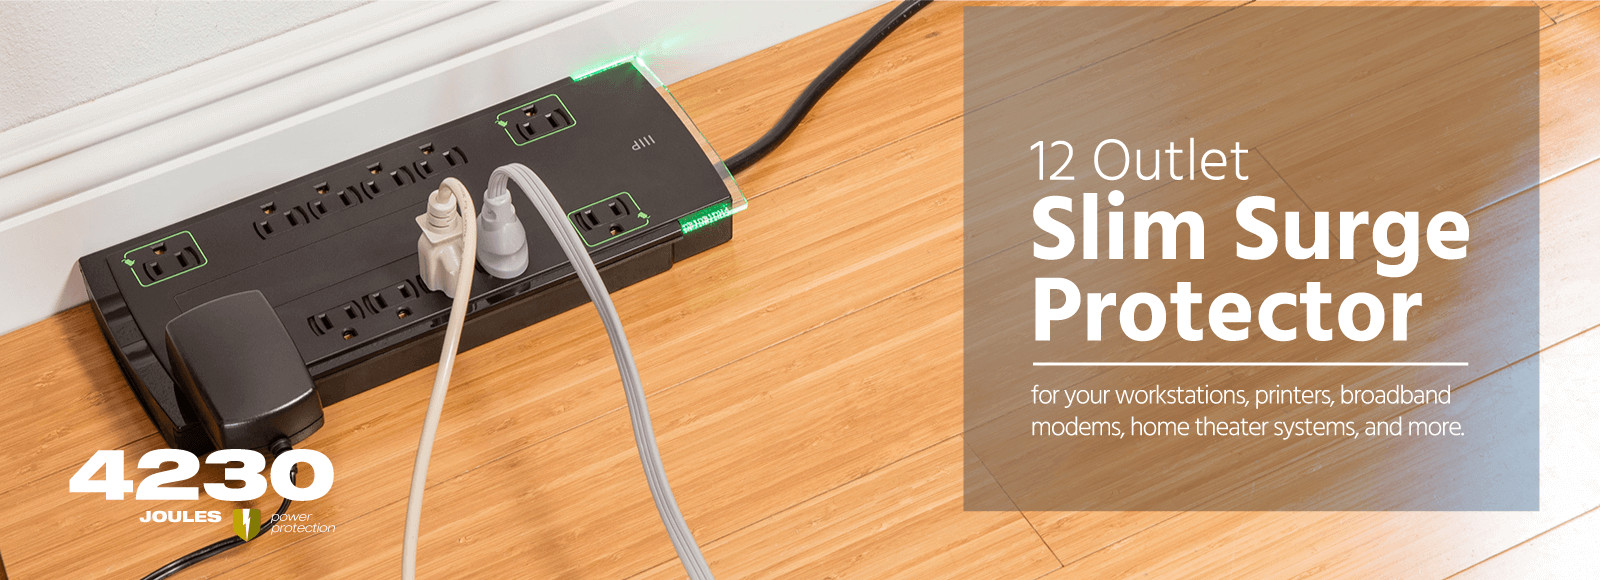 12 Outlet Slim Surge Protector 10ft Cord, 4230 Joules, Clamping Voltage 330V